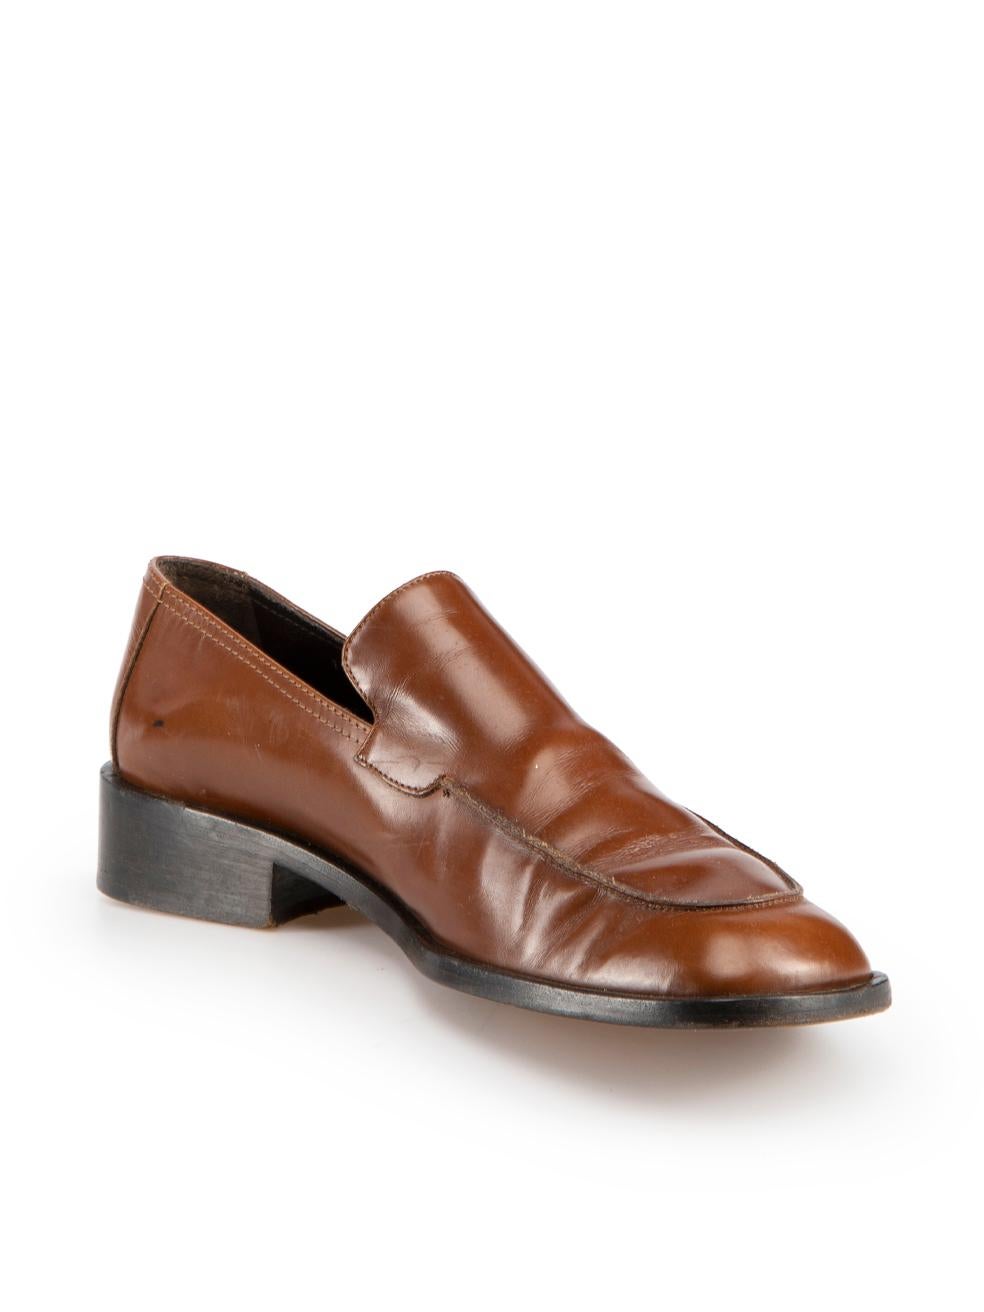 CONDITION is Good. General wear to loafers is evident. Moderate signs of creasing to overall leather and scuffing to leather on back of heels on this used Gucci designer resale item.
  
Details
Brown
Leather
Loafers
Square toe
Slip on
Low heel

Made